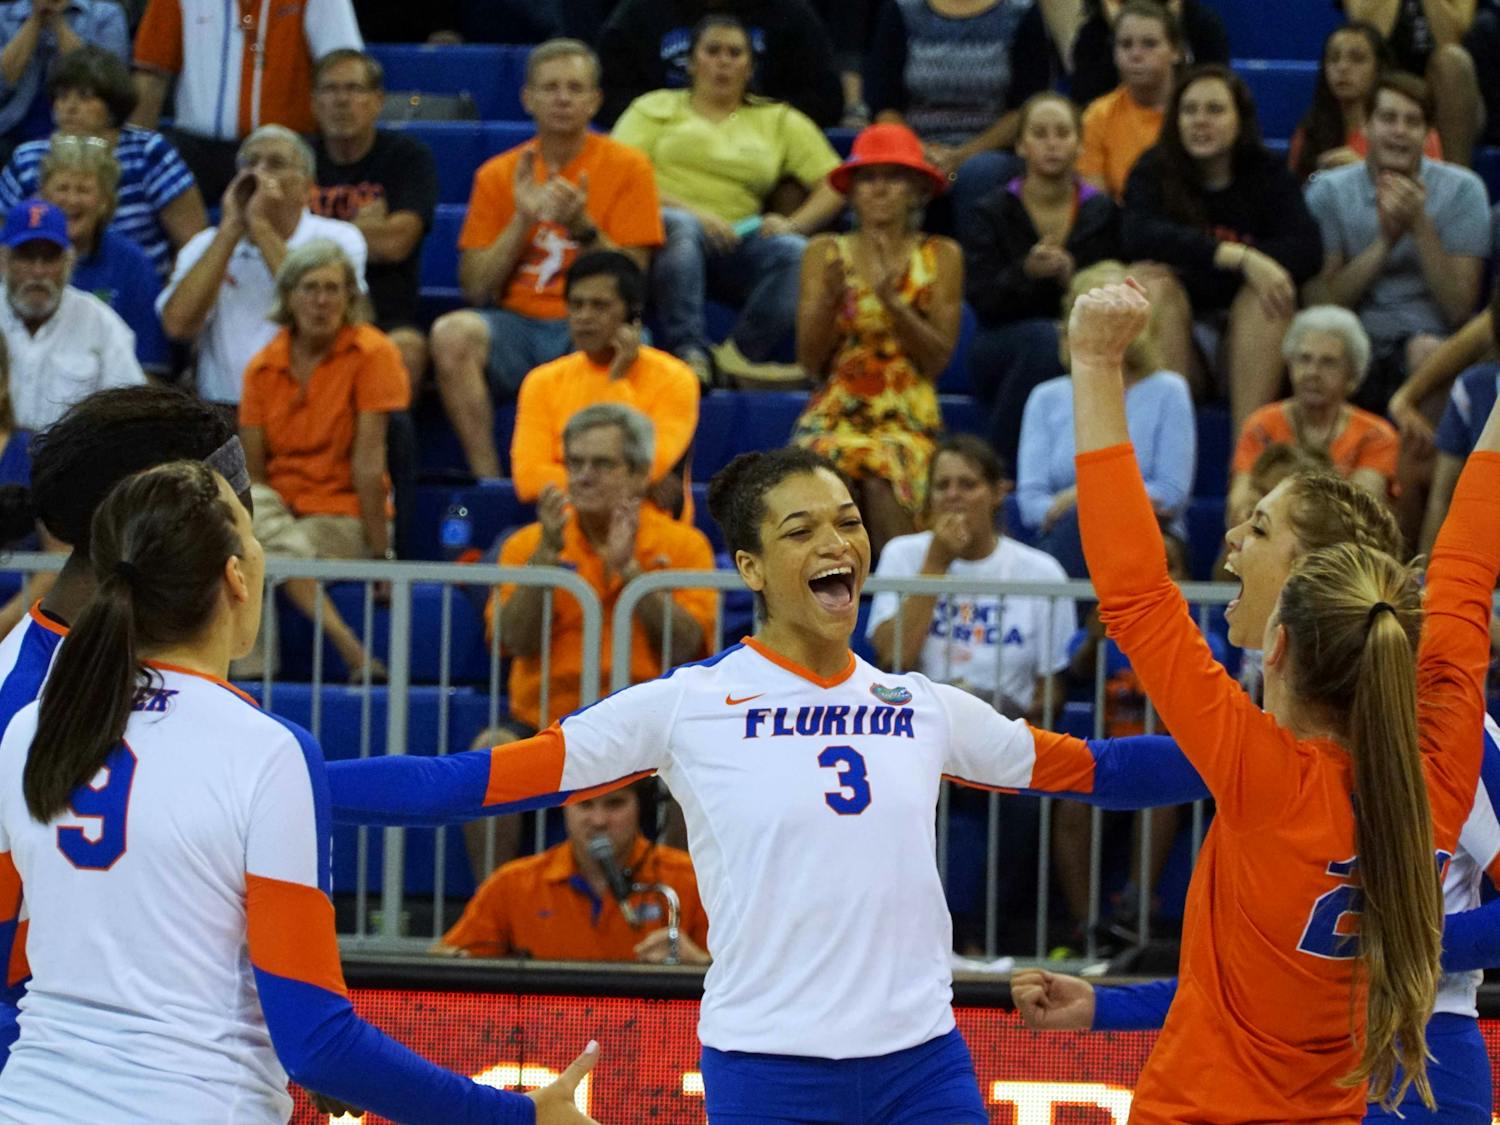 UF right-side hitter Alex Holston (3) celebrates during Florida's 3-0 win against St. John's on Sept. 17, 2015, in the O'Connell Center.